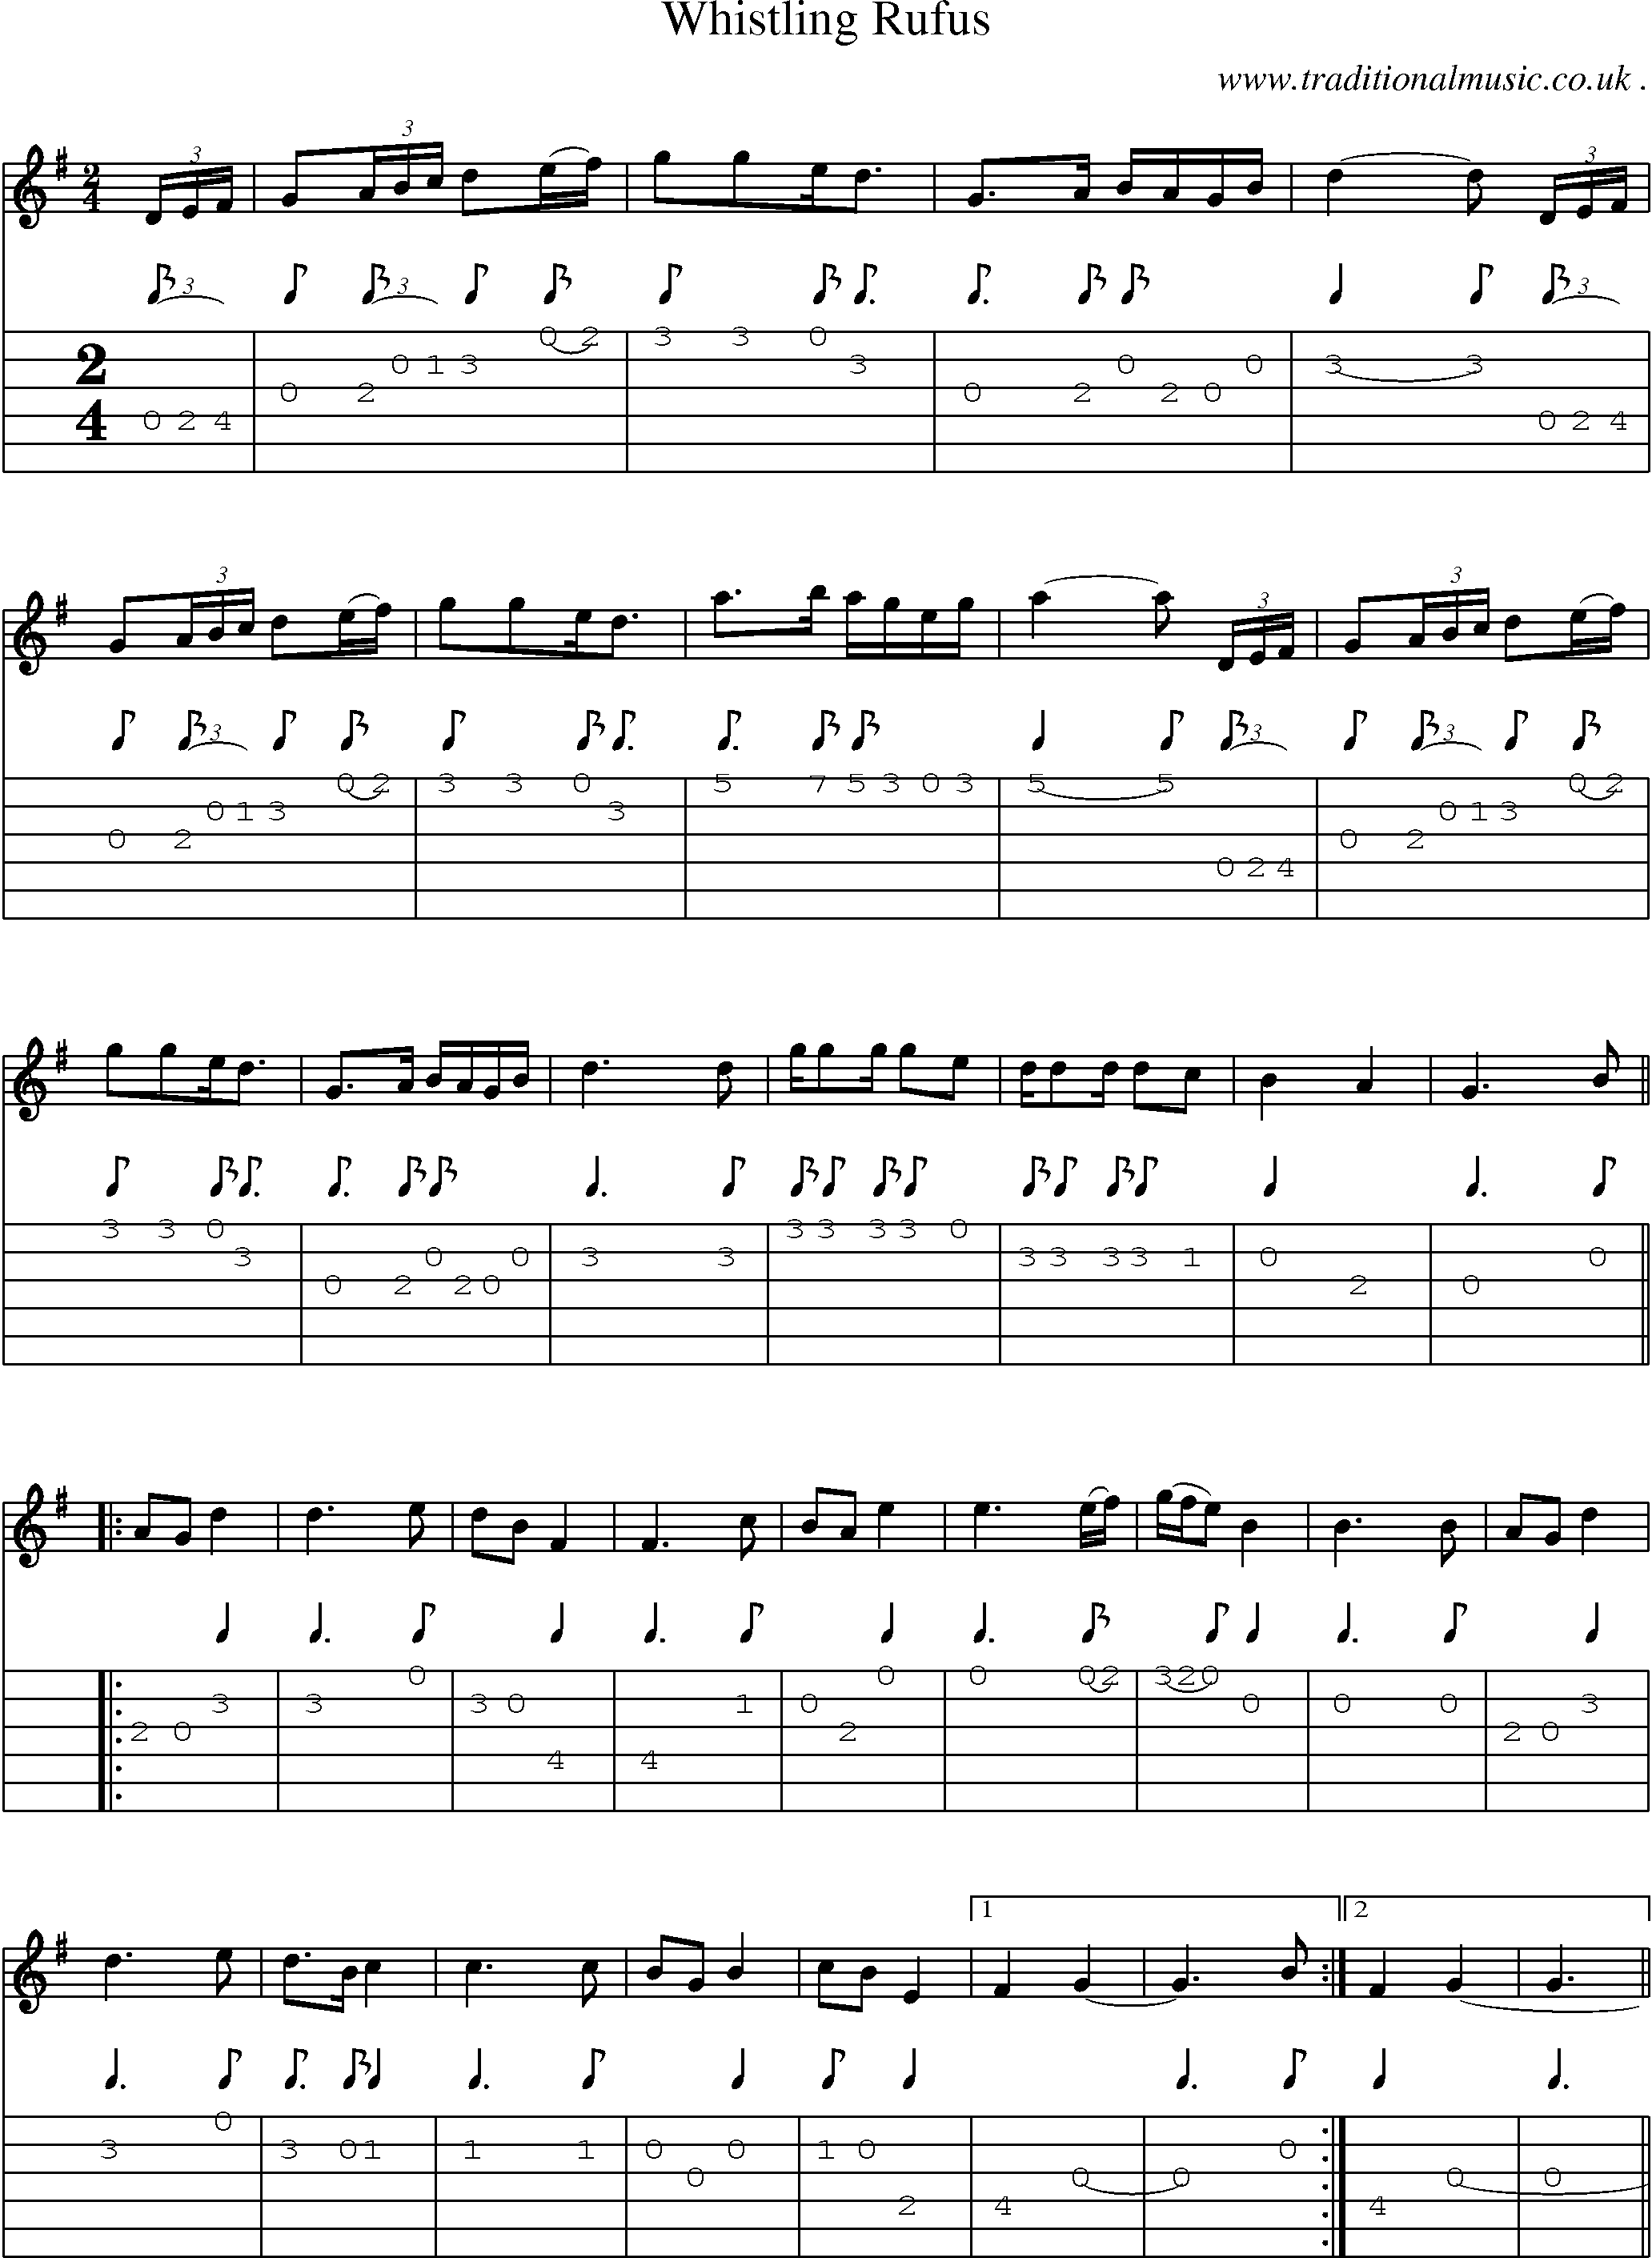 Sheet-music  score, Chords and Guitar Tabs for Whistling Rufus